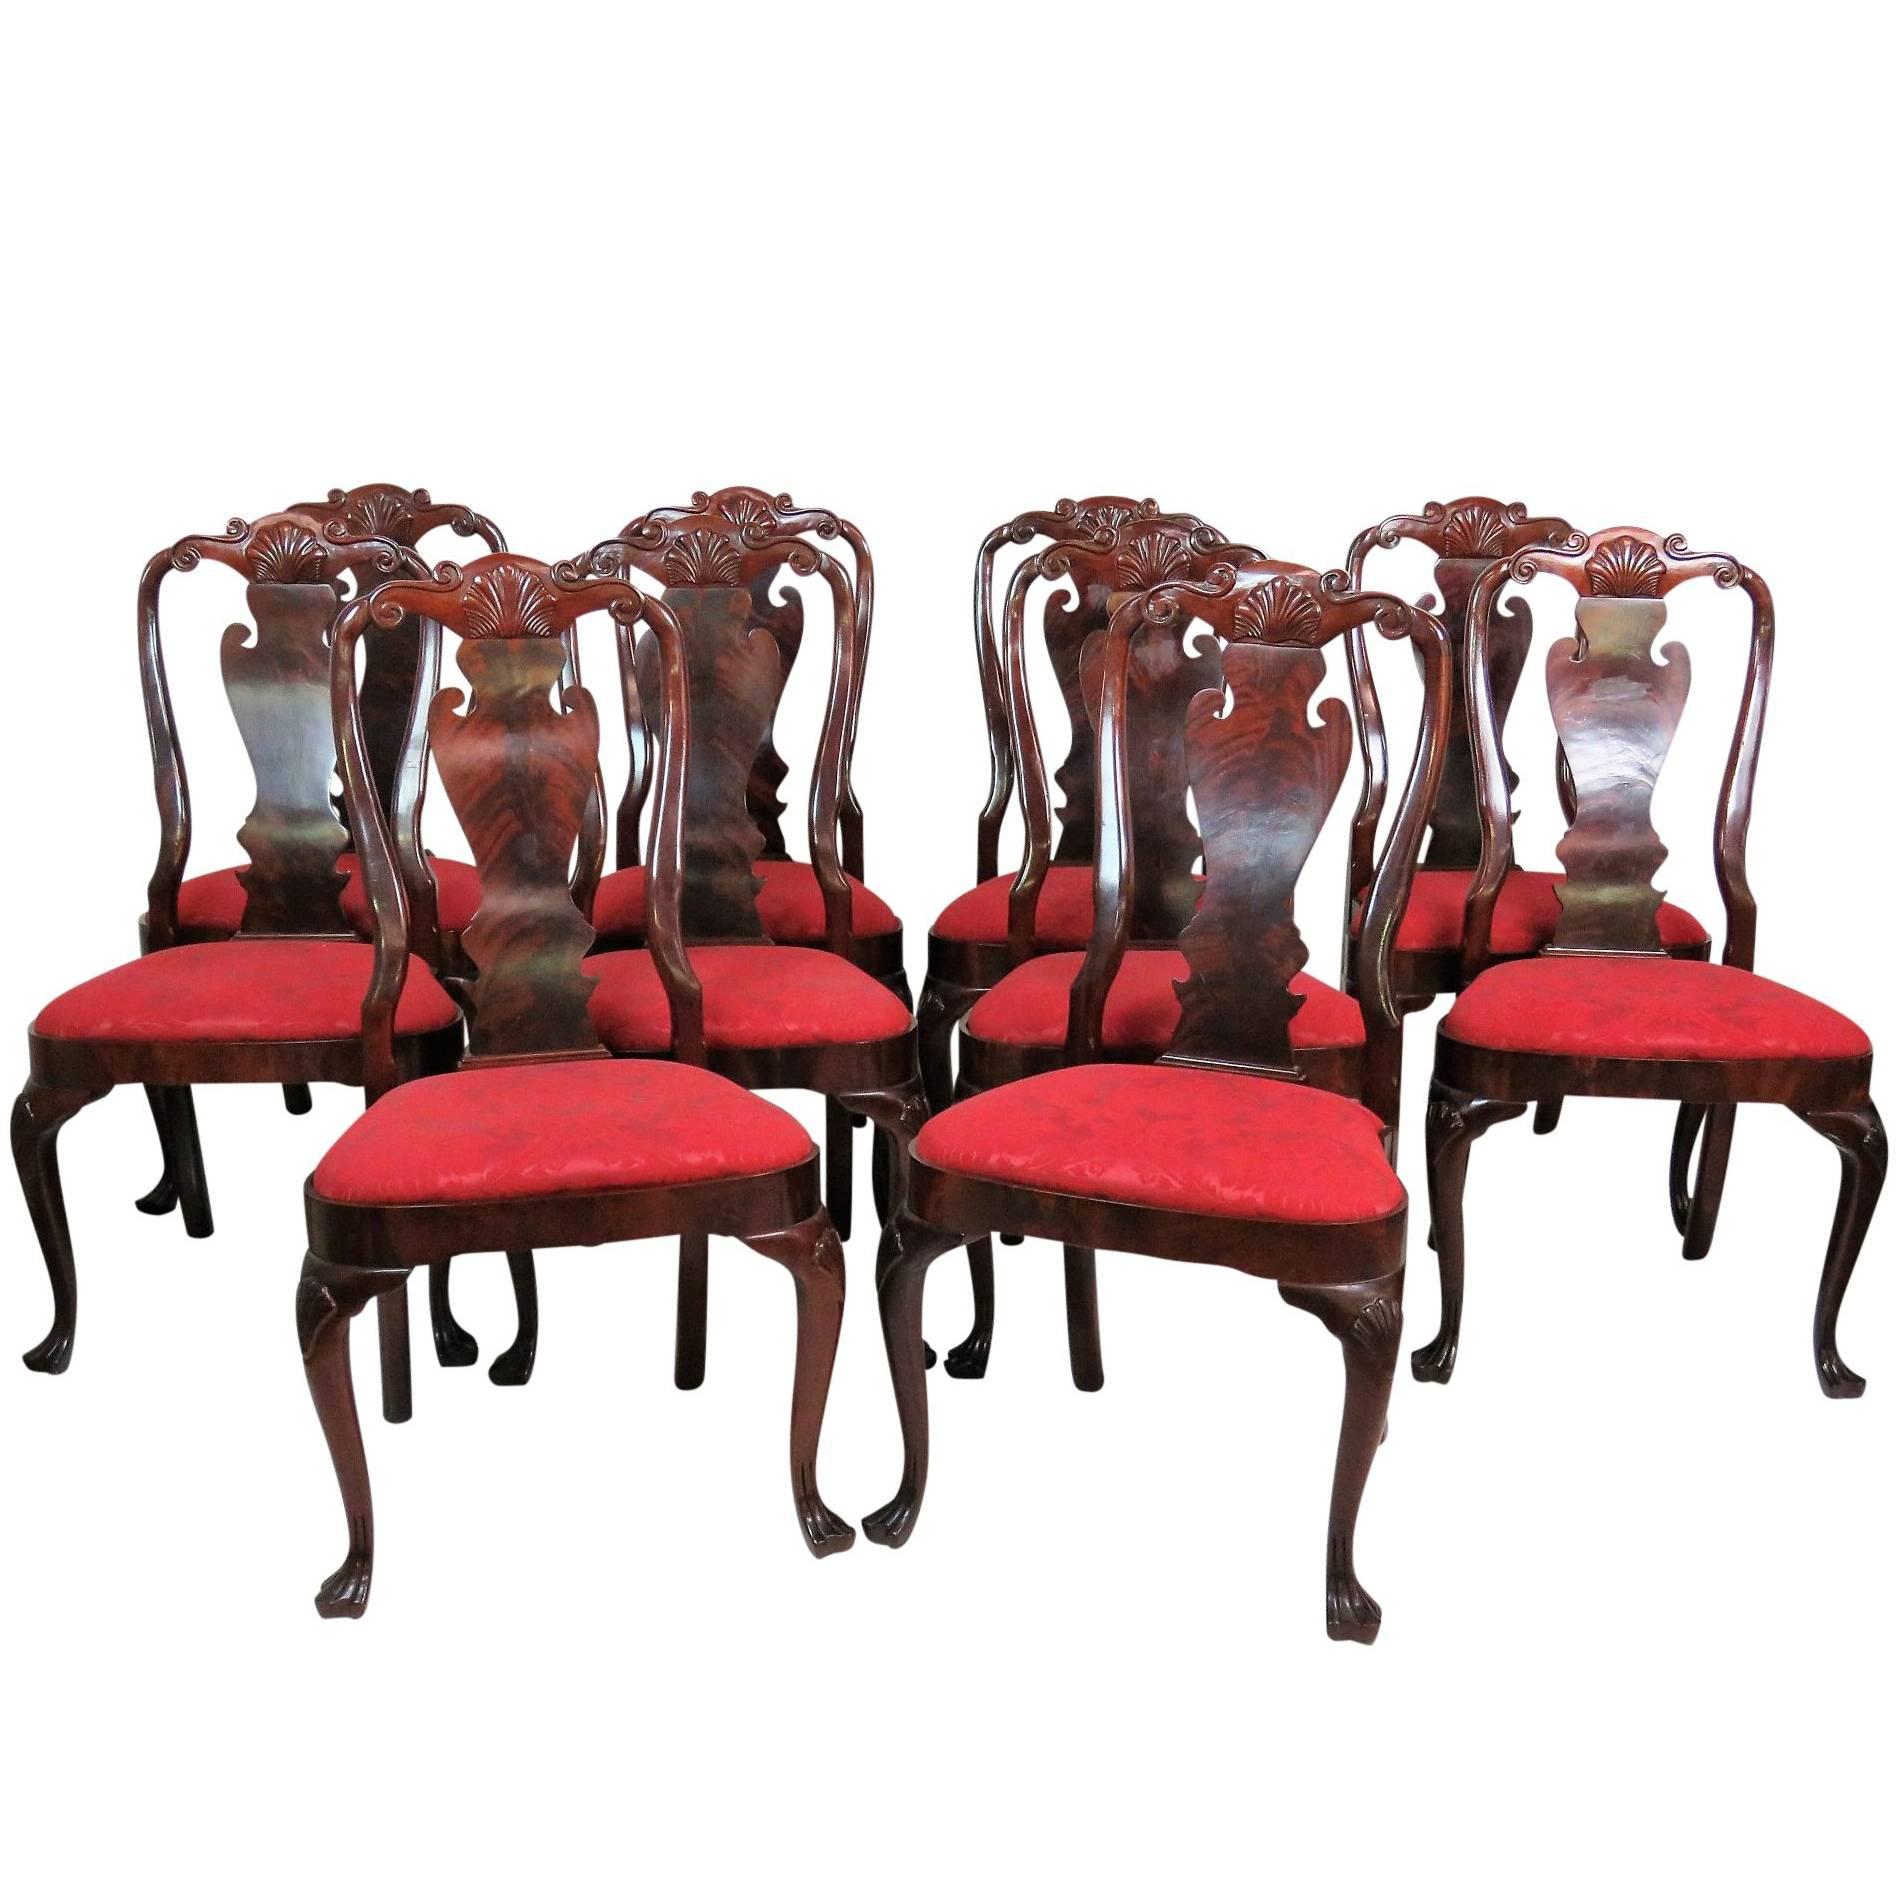 Ten Mahogany Carved Upholstered Dining Chairs